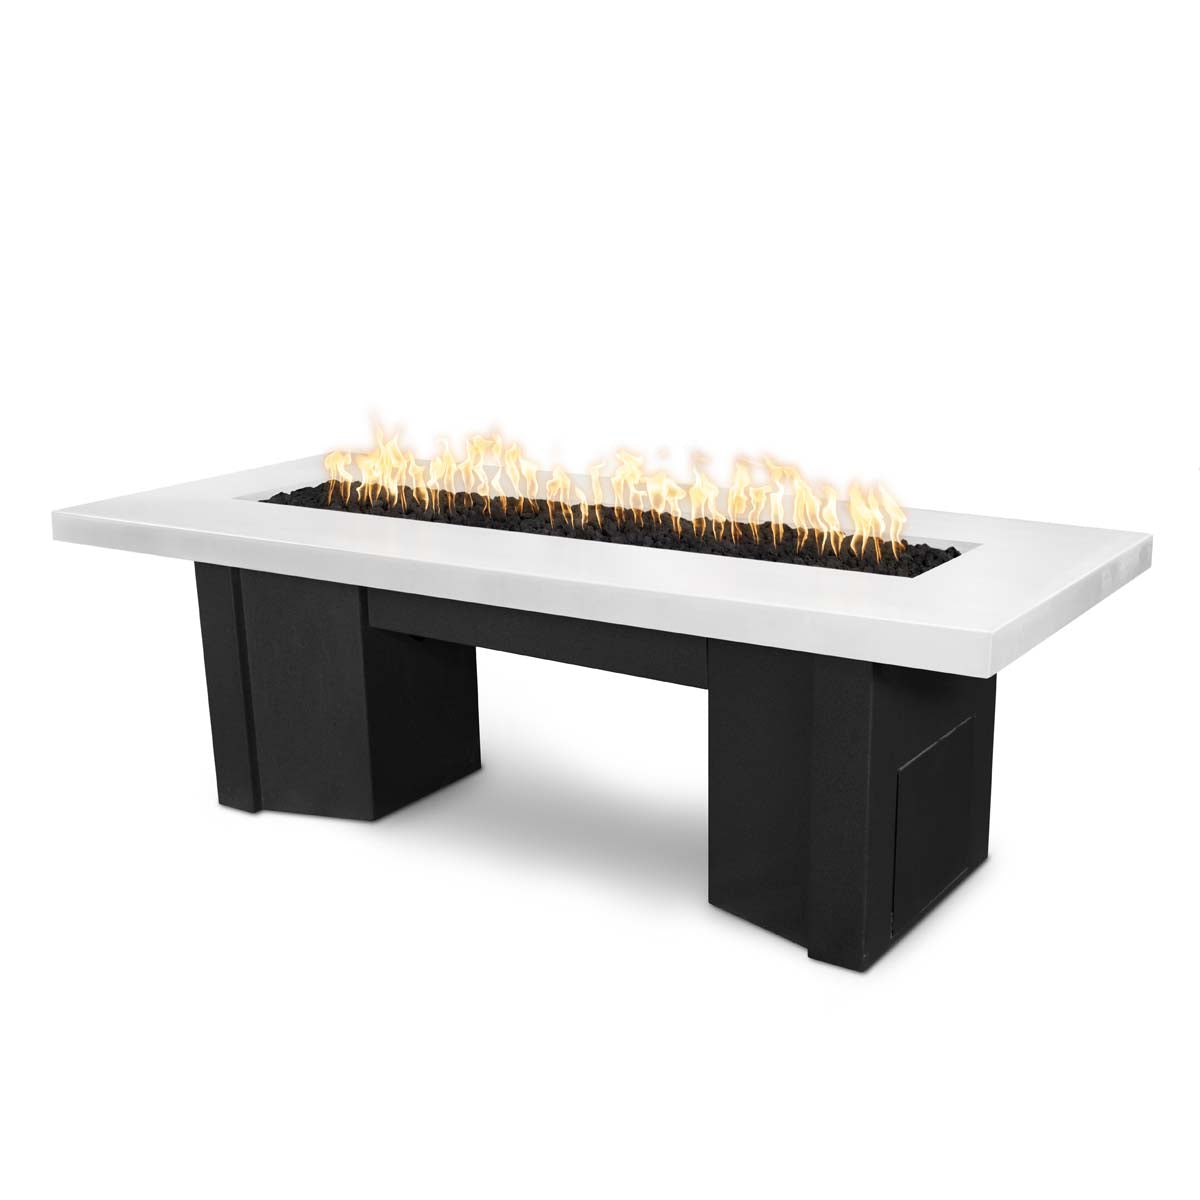 The Outdoor Plus Rectangular Alameda 48" Black & White Powder Coated Liquid Propane Fire Pit with Match Lit Ignition